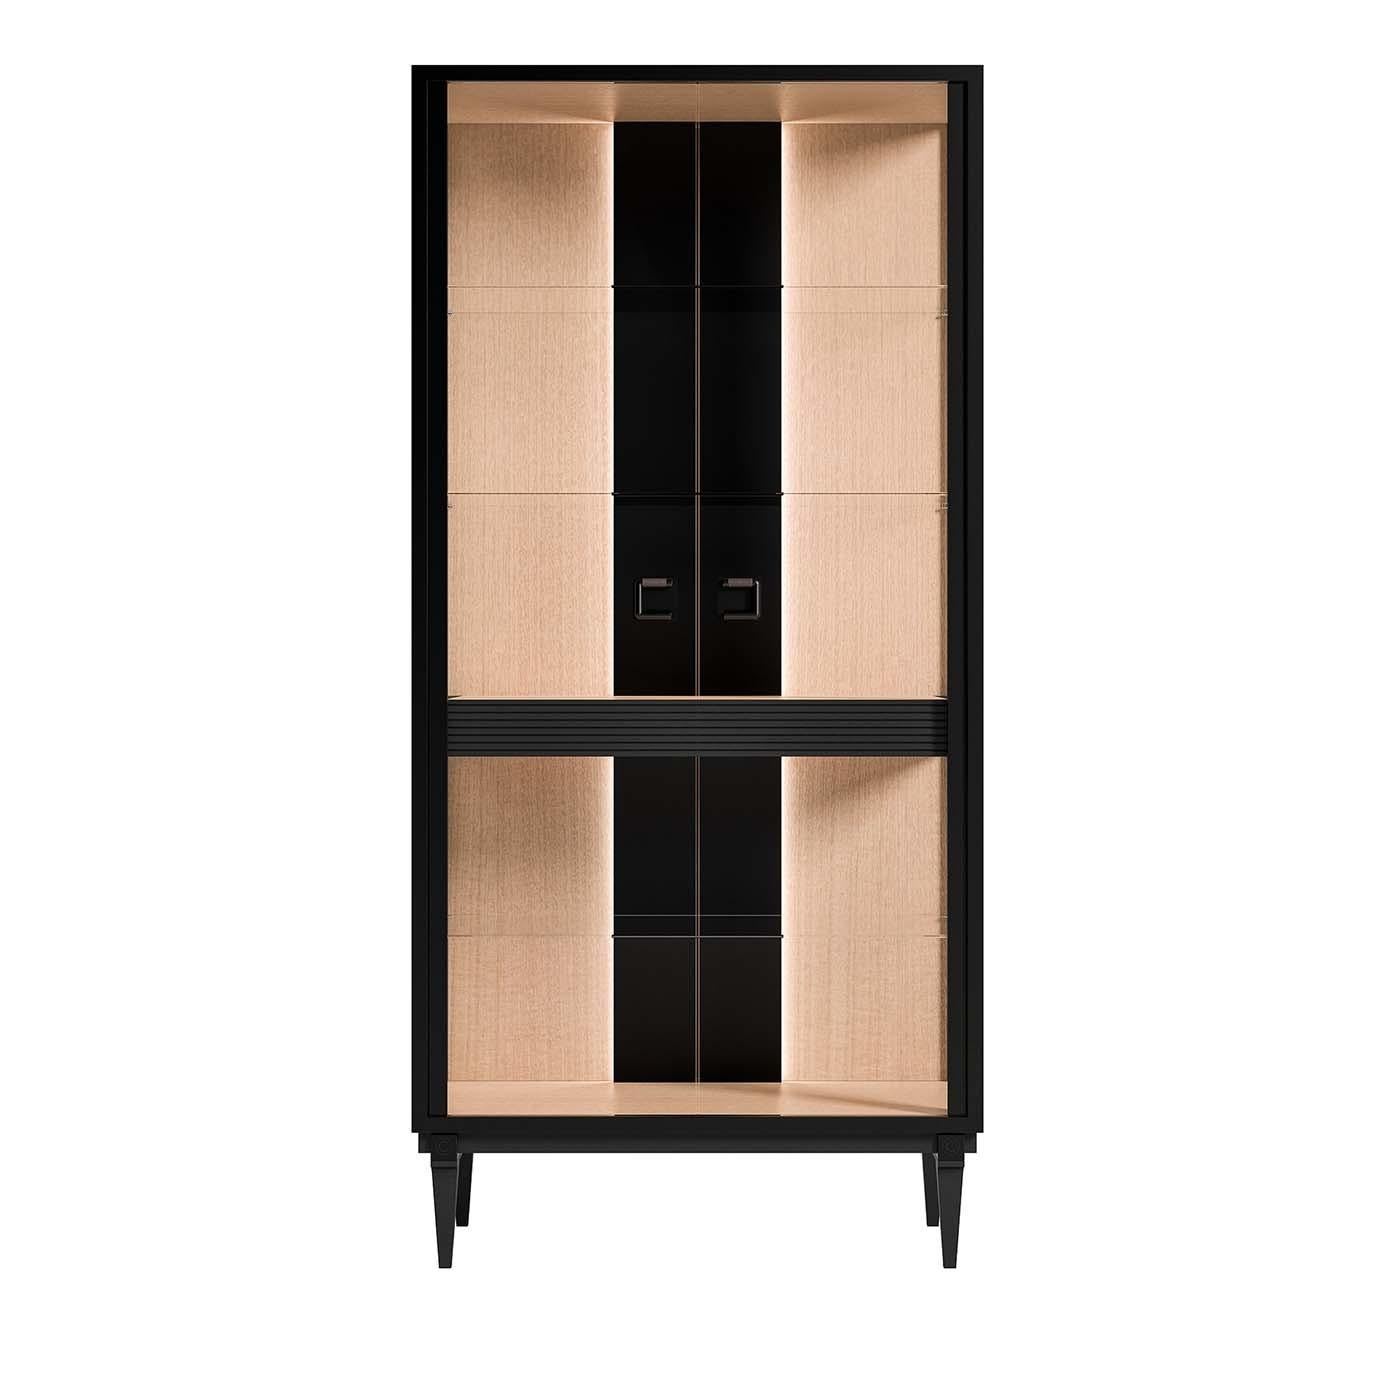 Defined by formal balance and modern aesthetic, this display cabinet revisits a midcentury design with a modern sensibility. Both elegant and functional, this piece has a eucalyptus-veneered frame raised on four tapered feet with a black finish. The